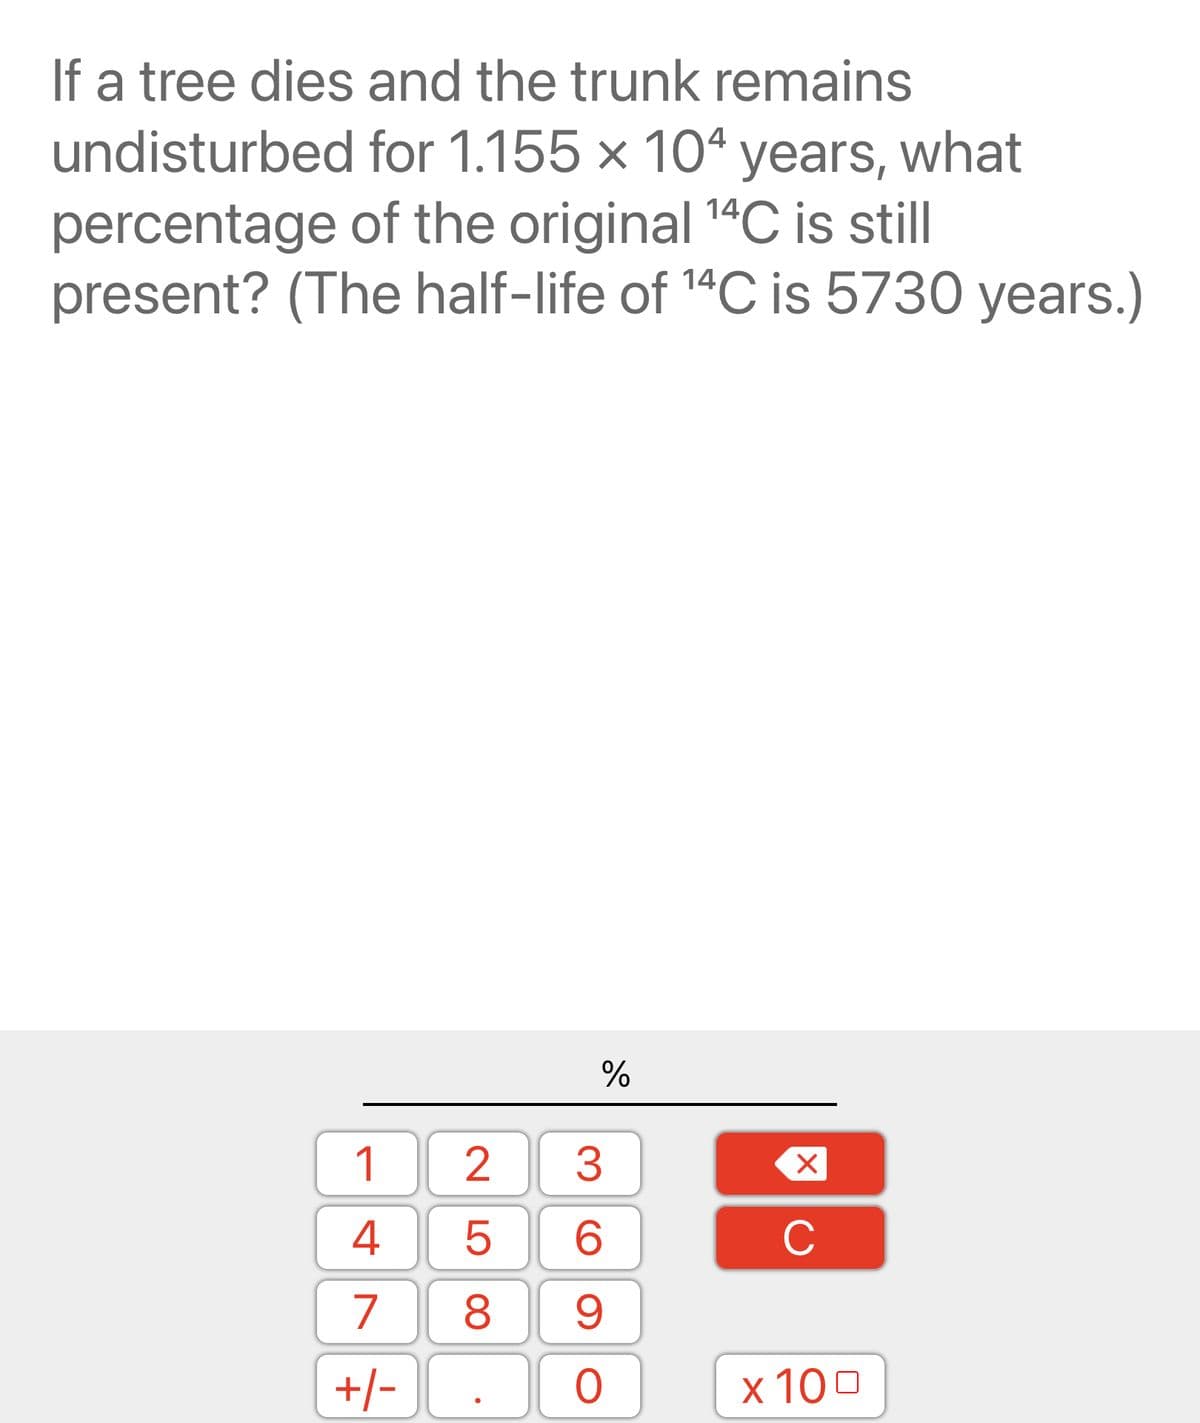 If a tree dies and the trunk remains
undisturbed for 1.155 x 104 years, what
percentage of the original ¹4C is still
present? (The half-life of ¹4C is 5730 years.)
14
14
1
4
7
+/-
258
%
3
6
9
0
X
C
x 100